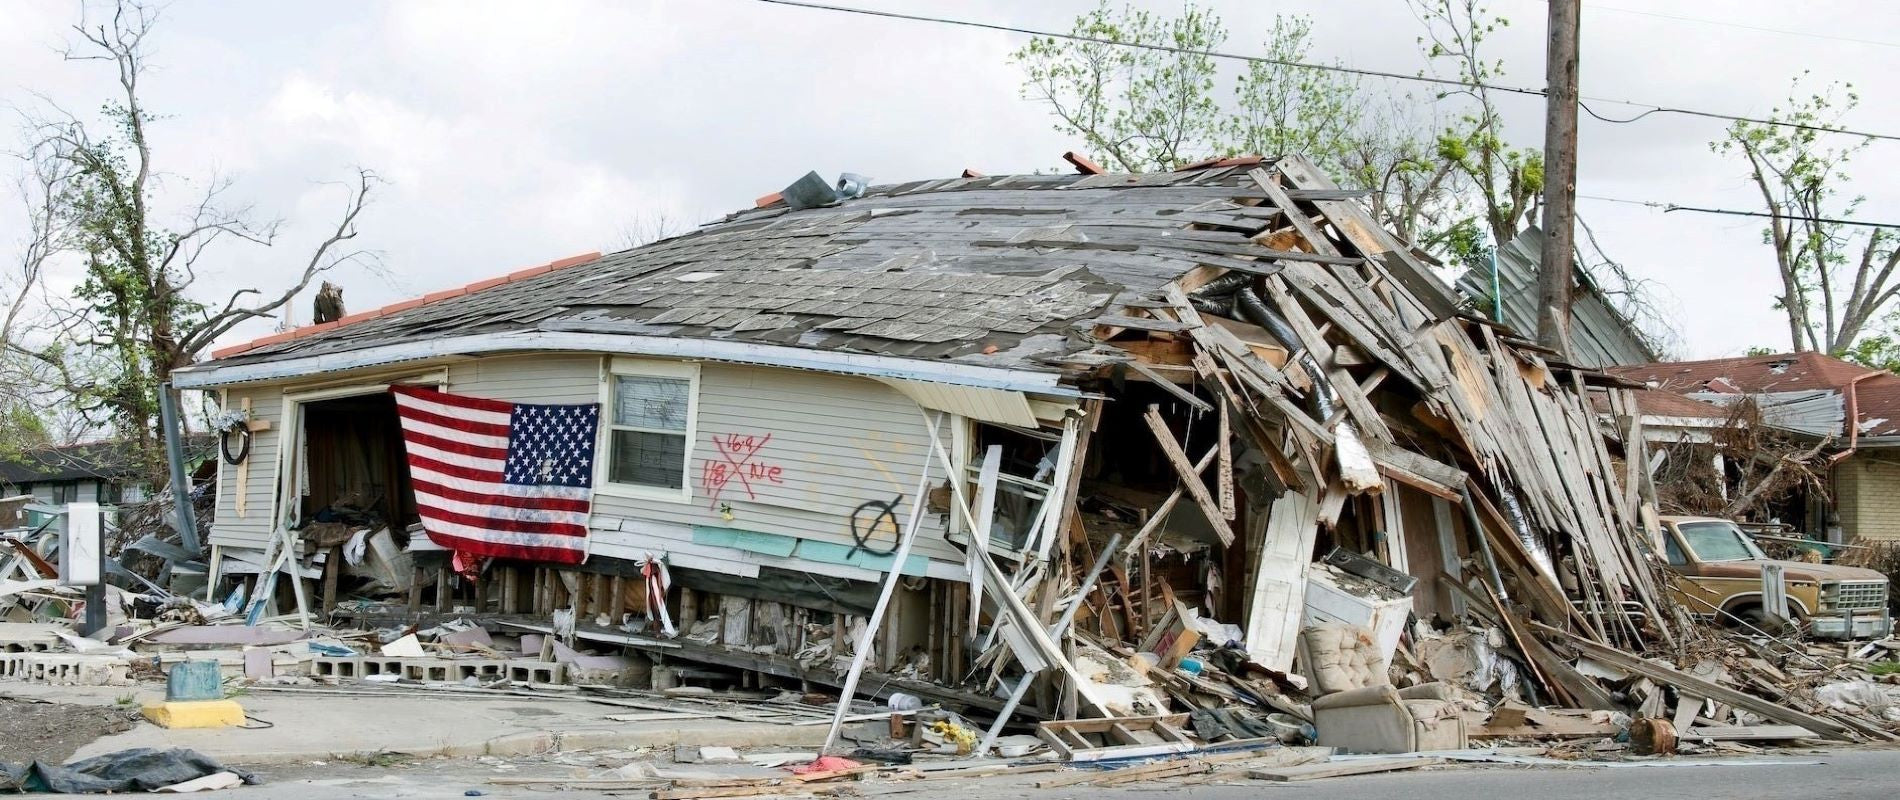 Katrina - Hurricane force winds devasated home beyond repair. American Flag hung on outside of delapotated remains in advance of demolition.